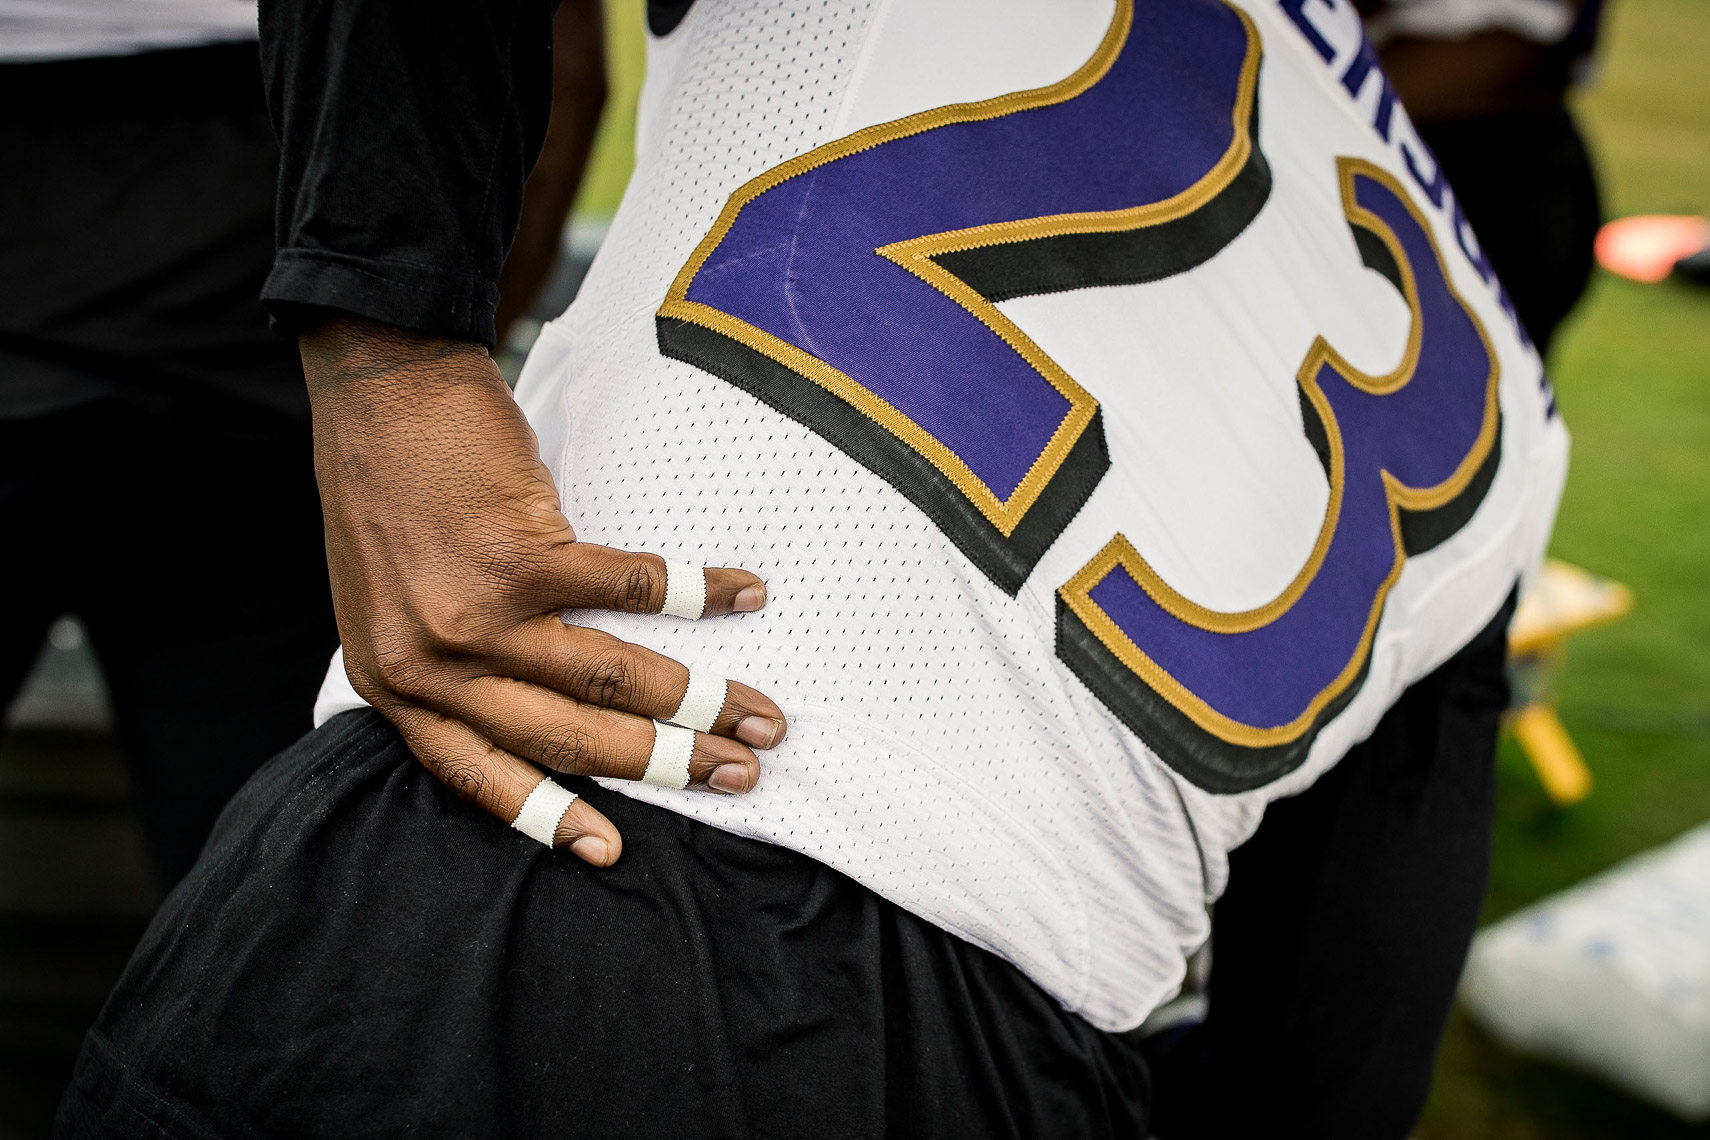 A day in the life of NFL training camp documentary story Baltimore photojournalist Shawn Hubbard